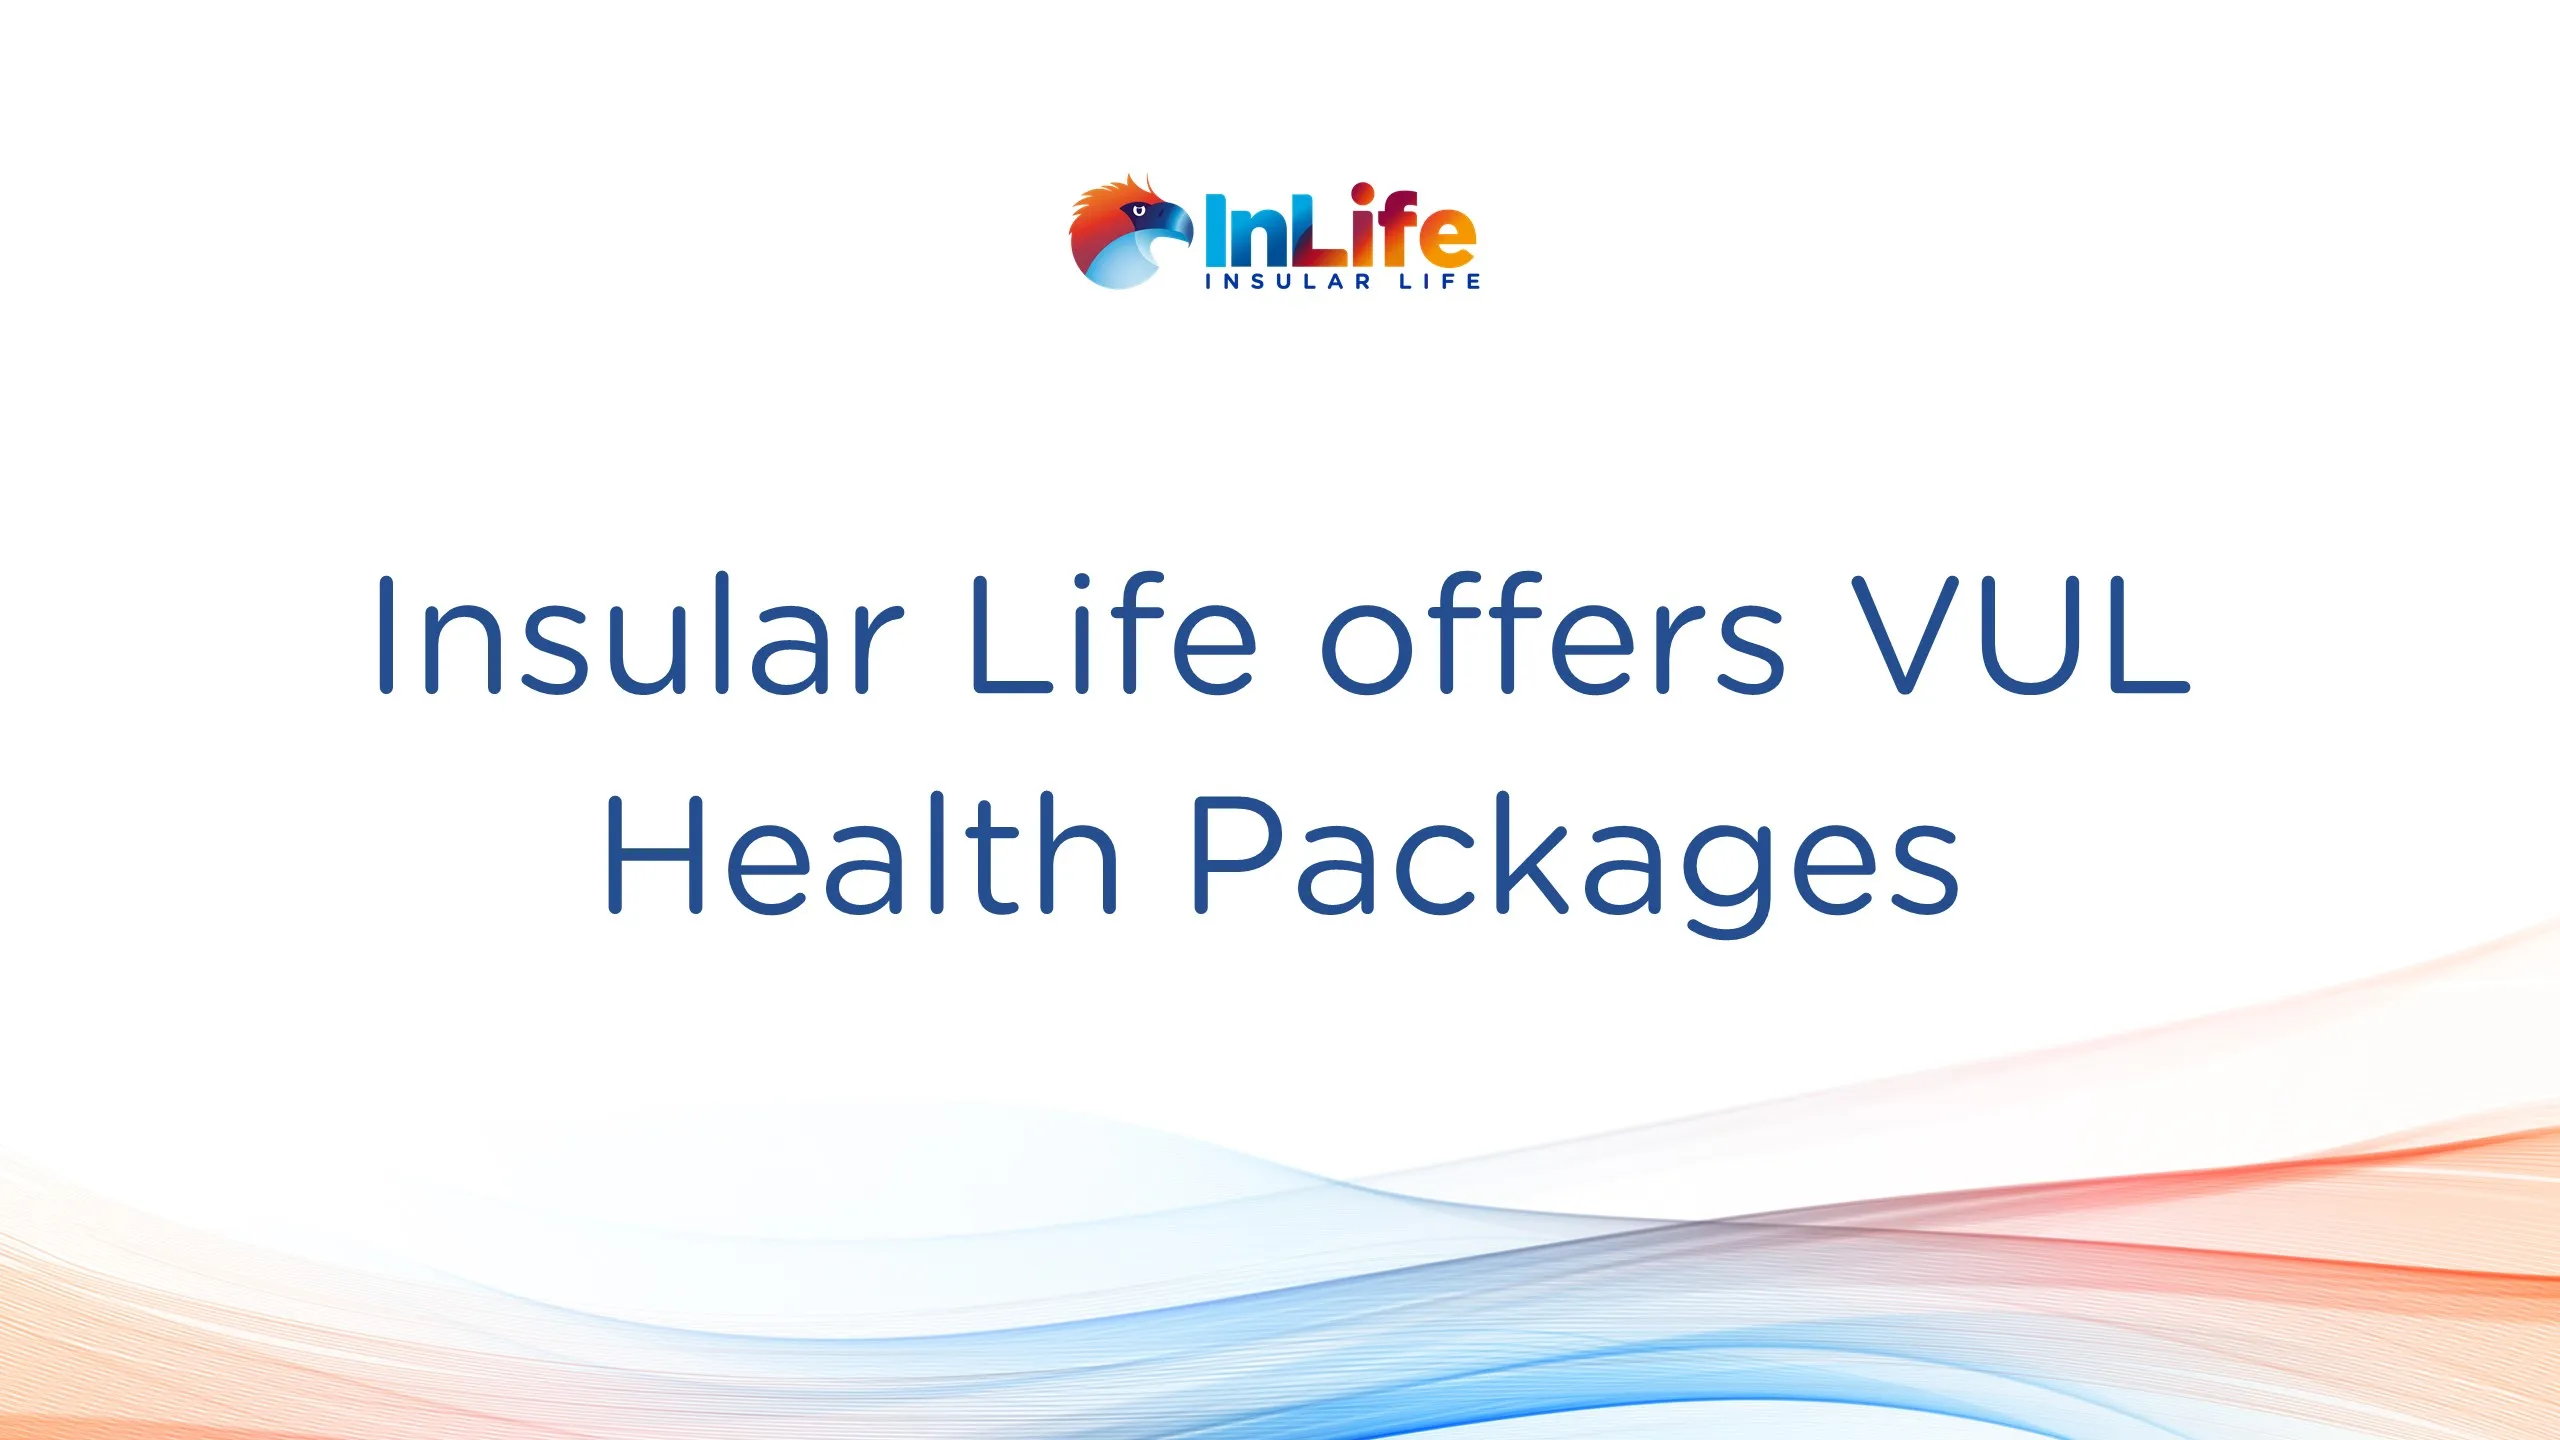 insular-life-offers-vul-health-packages-for-dread-disease-and-hospitalization-coverage